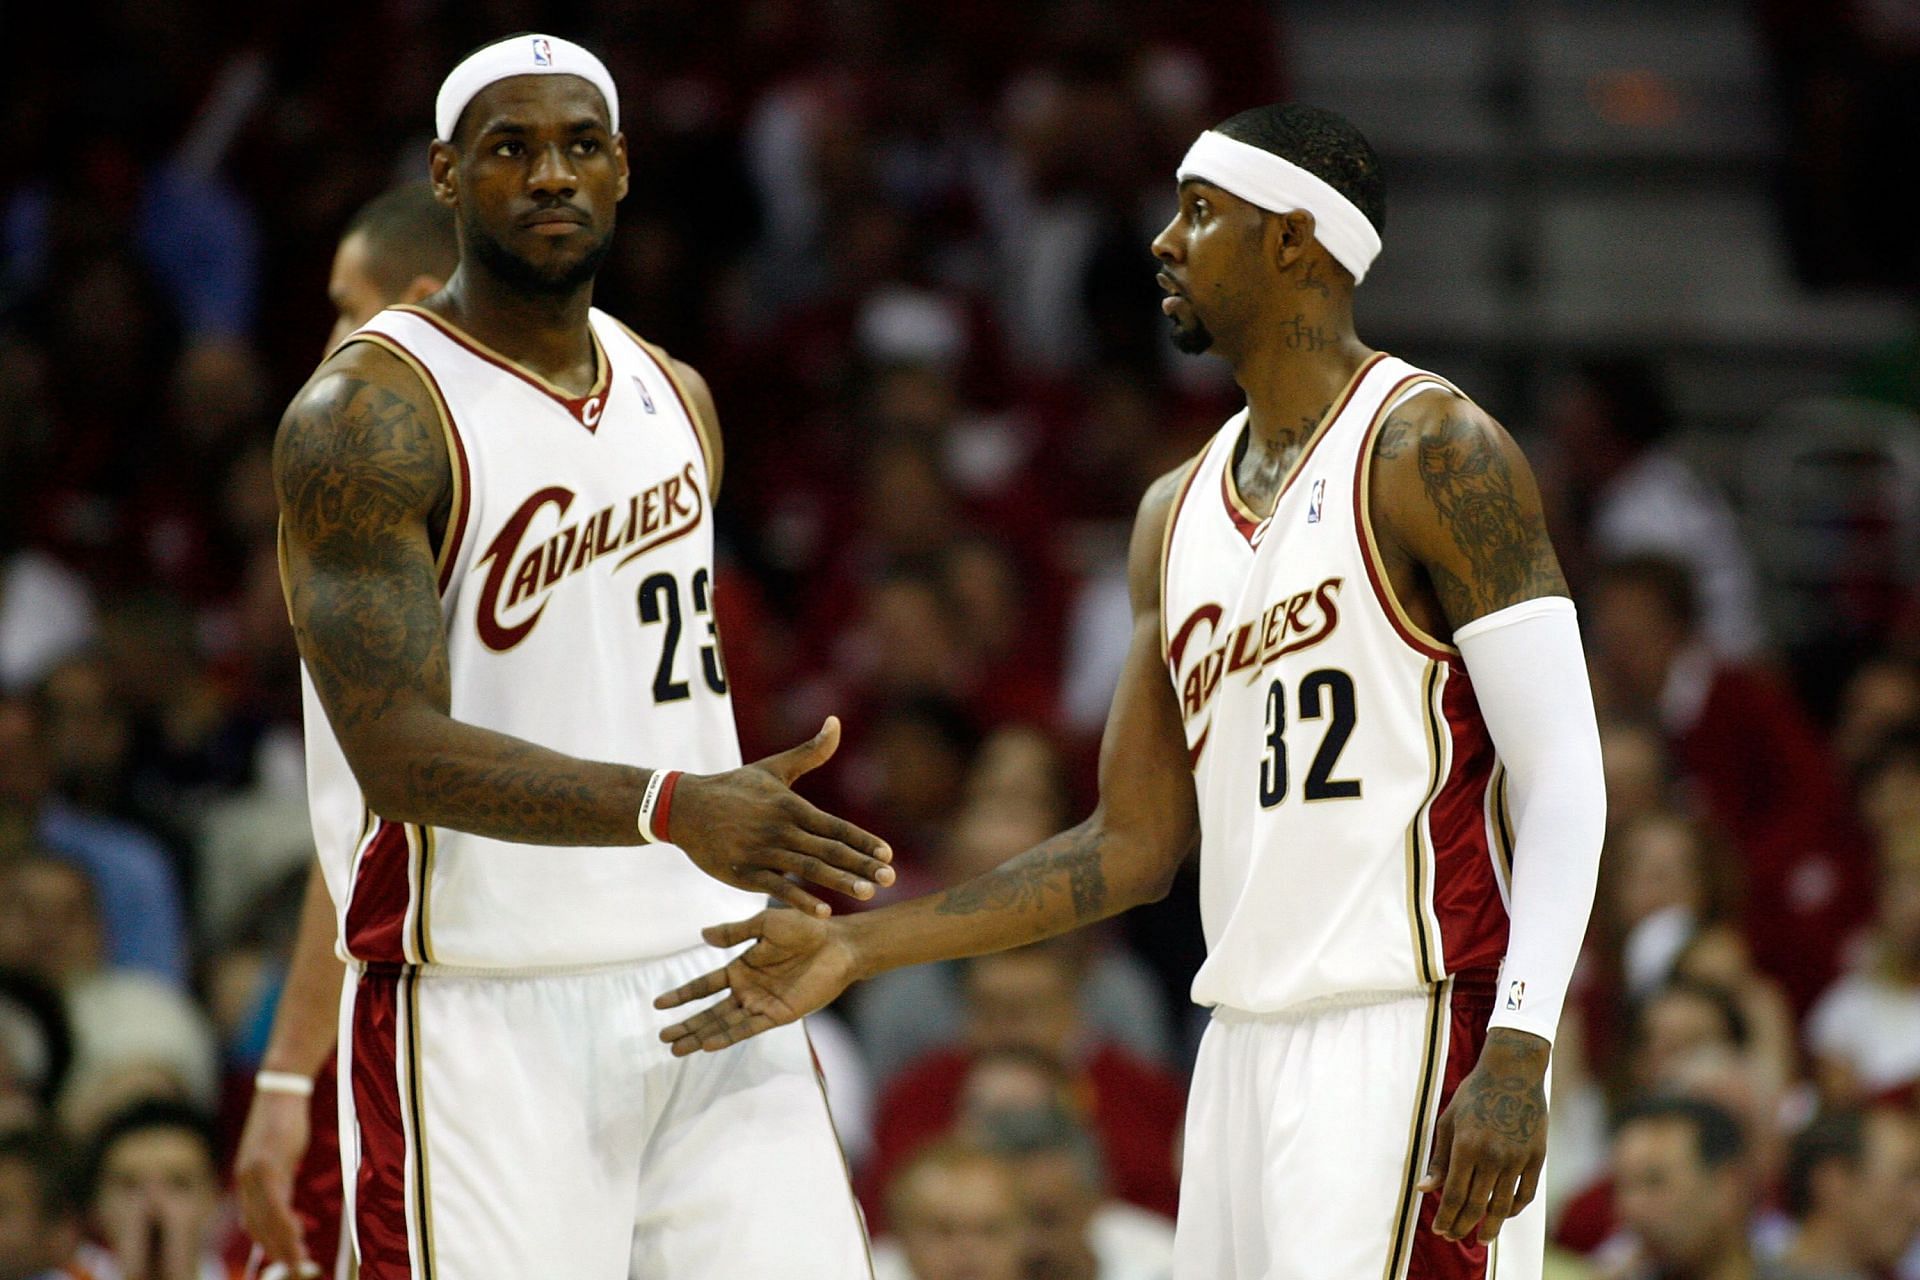 Larry Hughes #32 and Lebron James #23 of the Cleveland Cavaliers in 2007.